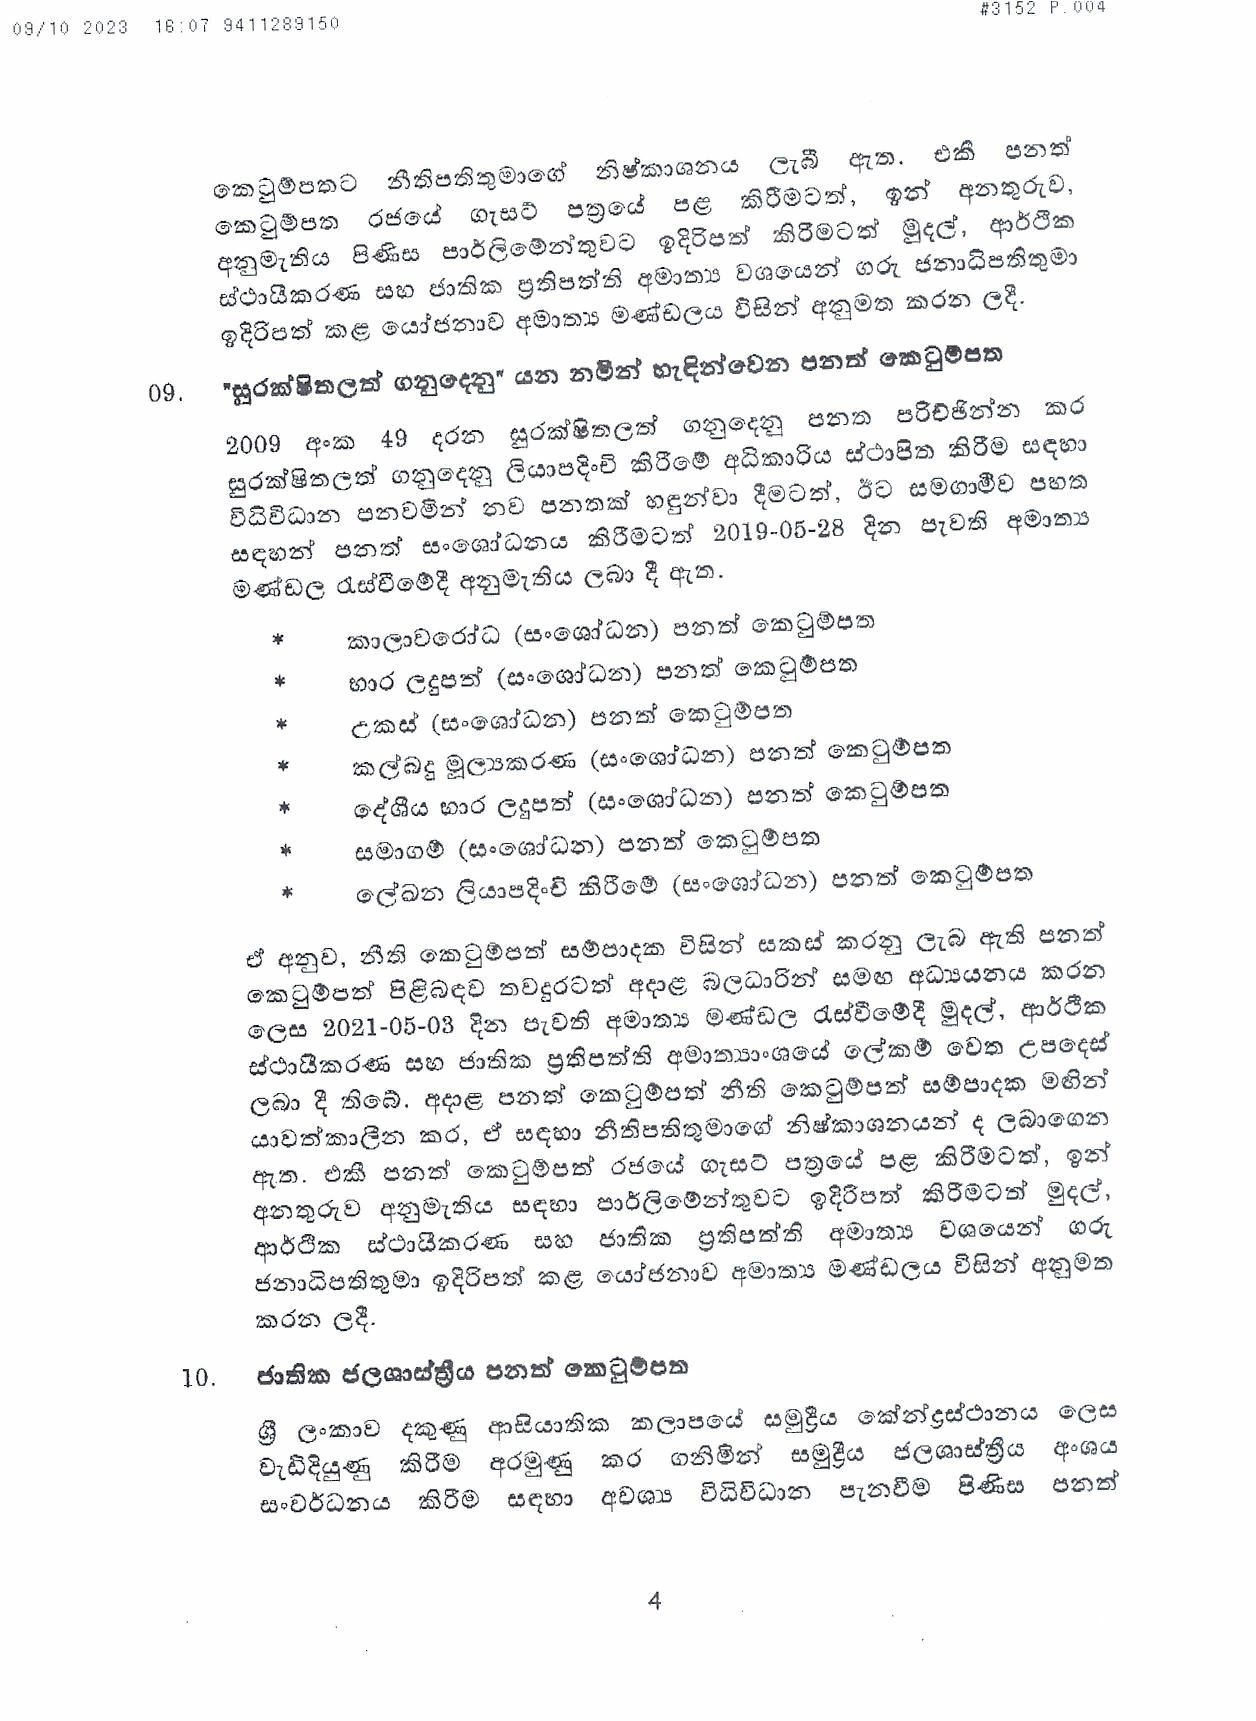 Cabinet Decision on 09.10.2023 page 004